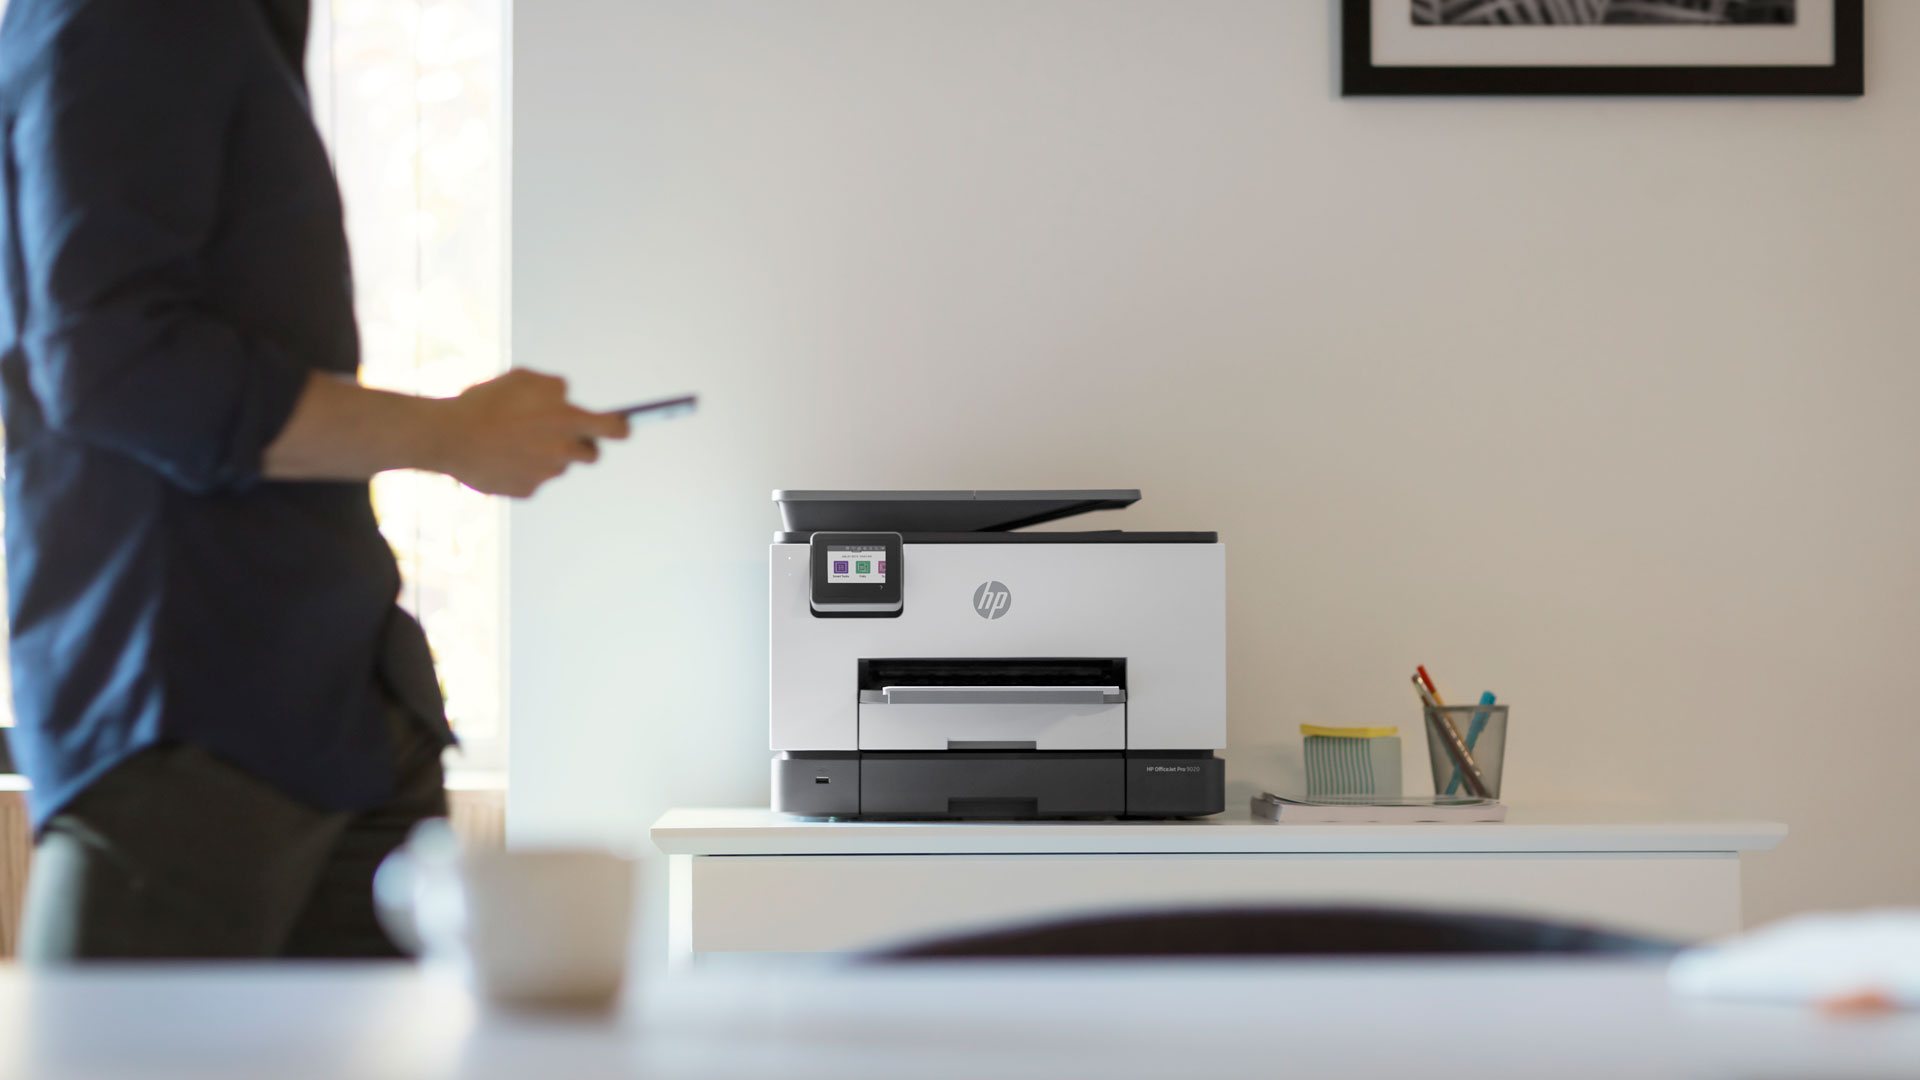 With a clean and modern design, HP's OfficeJet Pro printers can fit discretely into any home or office setting.